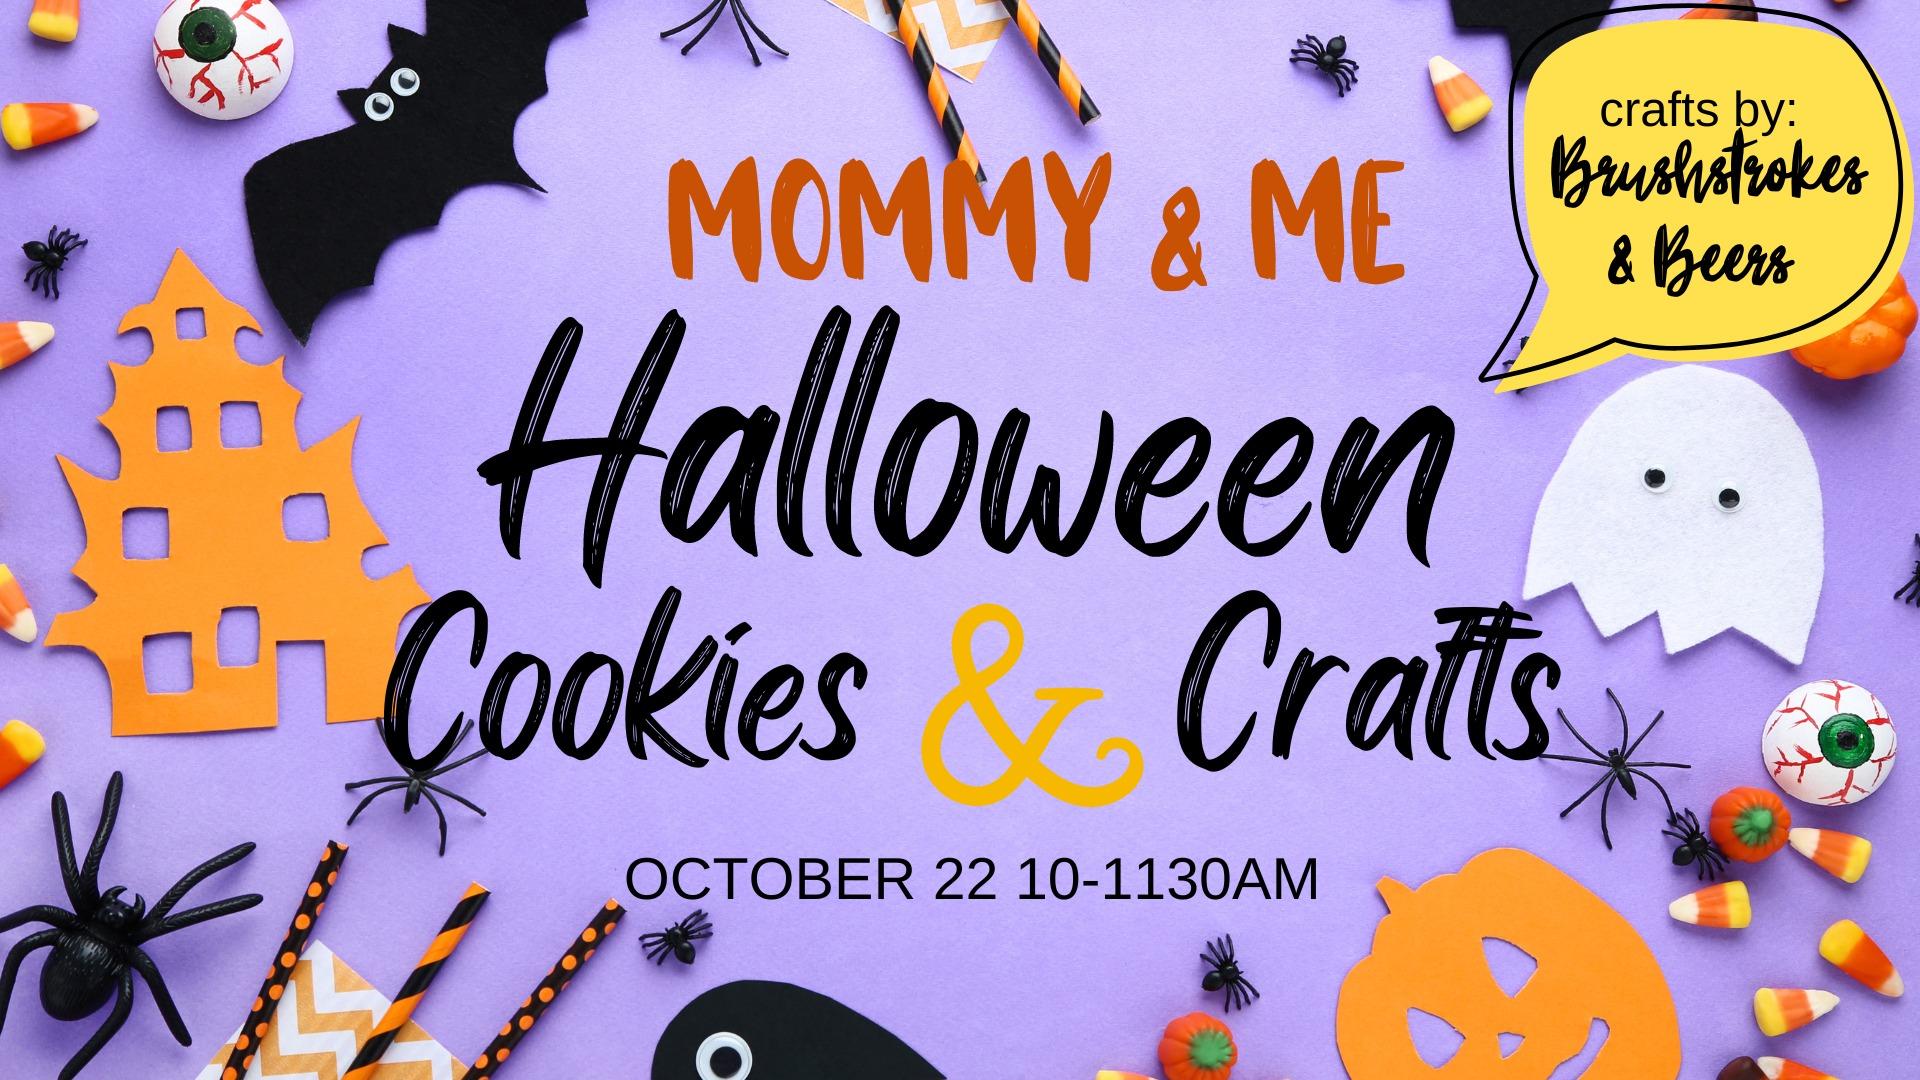 Mommy & Me Halloween- Cookies and Crafts!
Sat Oct 22, 10:00 AM - Sat Oct 22, 11:30 AM
in 2 days